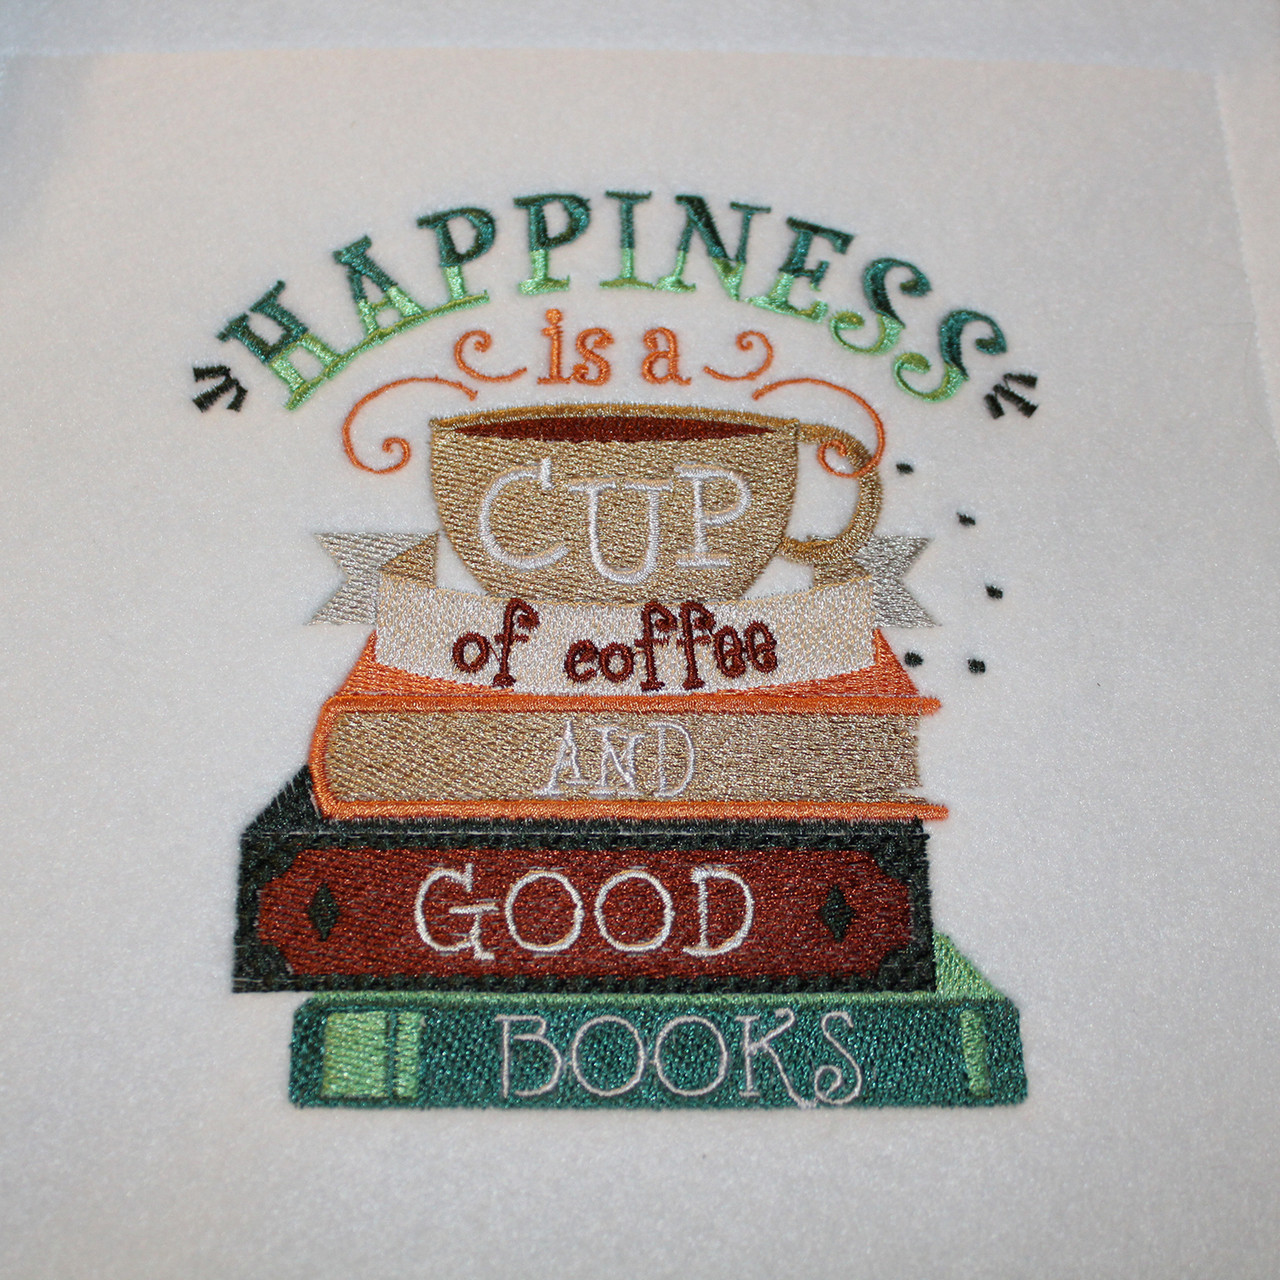 My choice of the best Machine Embroidery Books for you